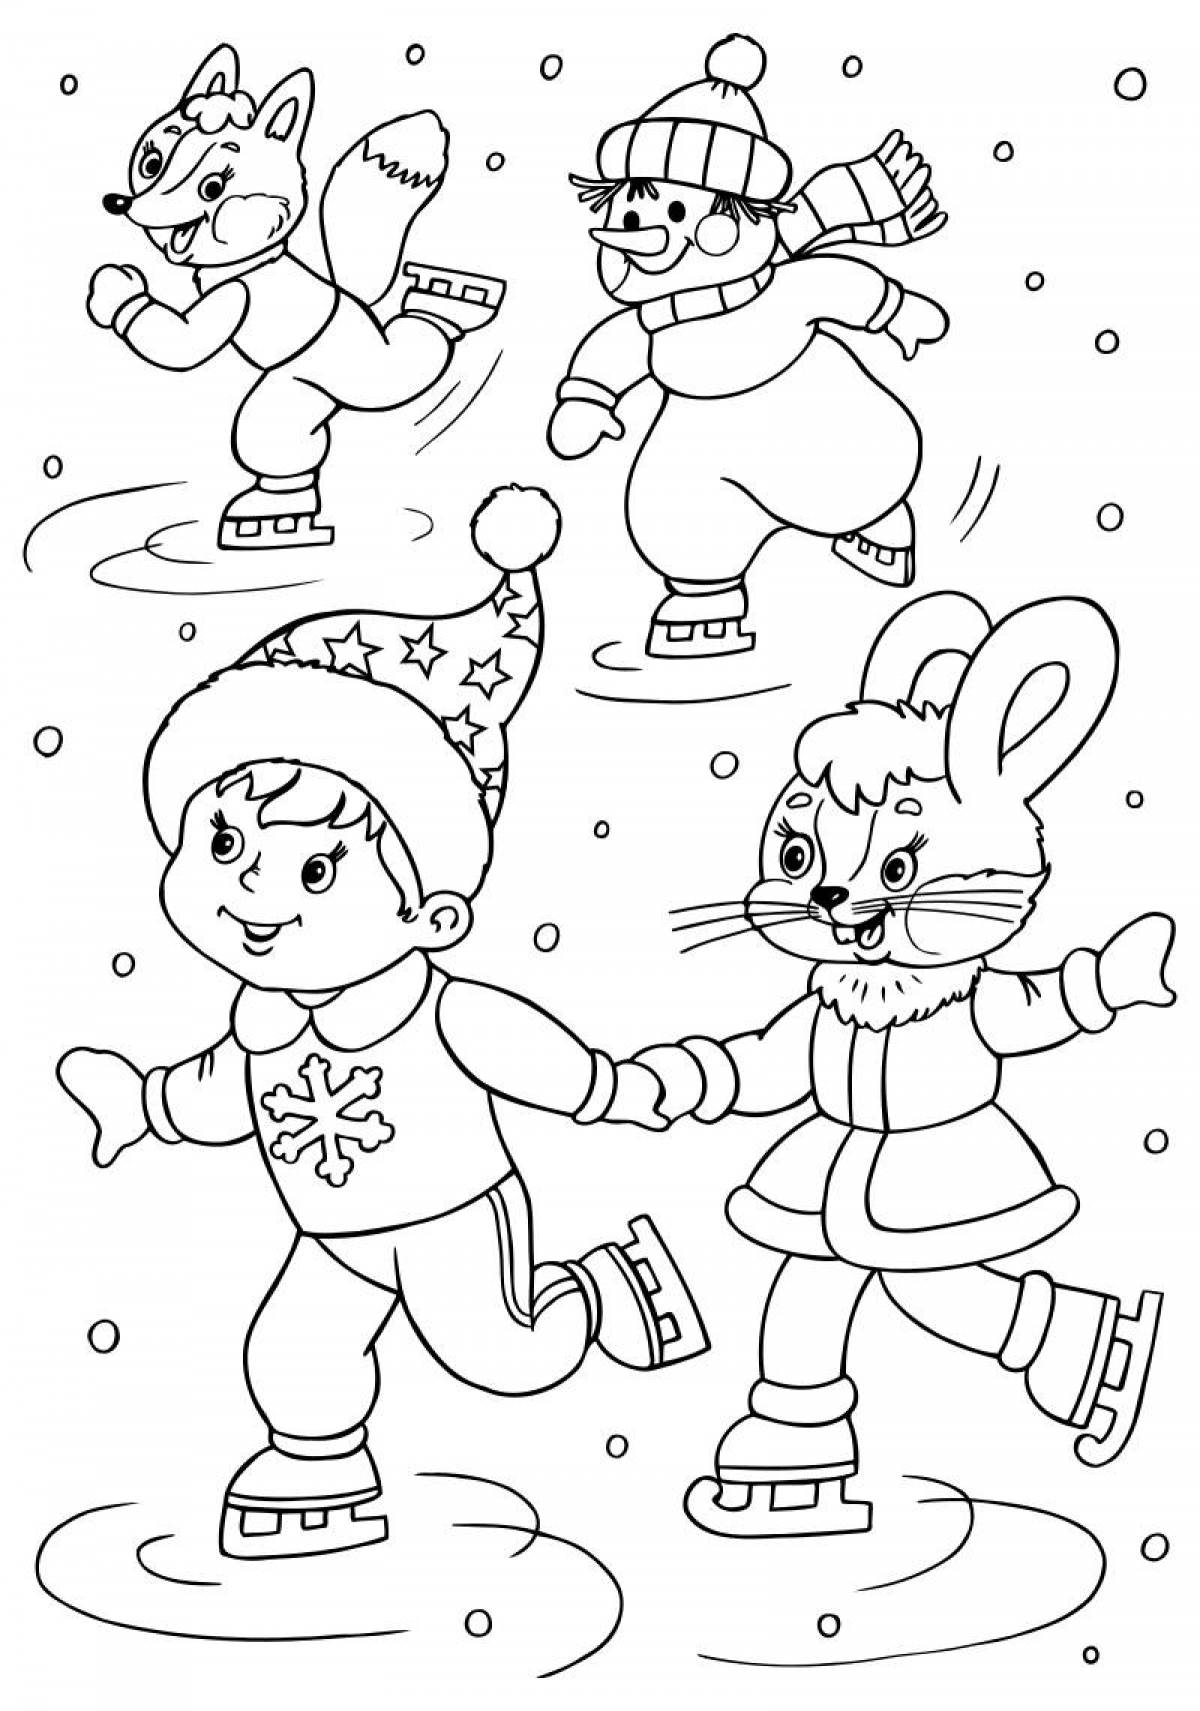 Whimsical winter coloring book for kids 5-6 years old